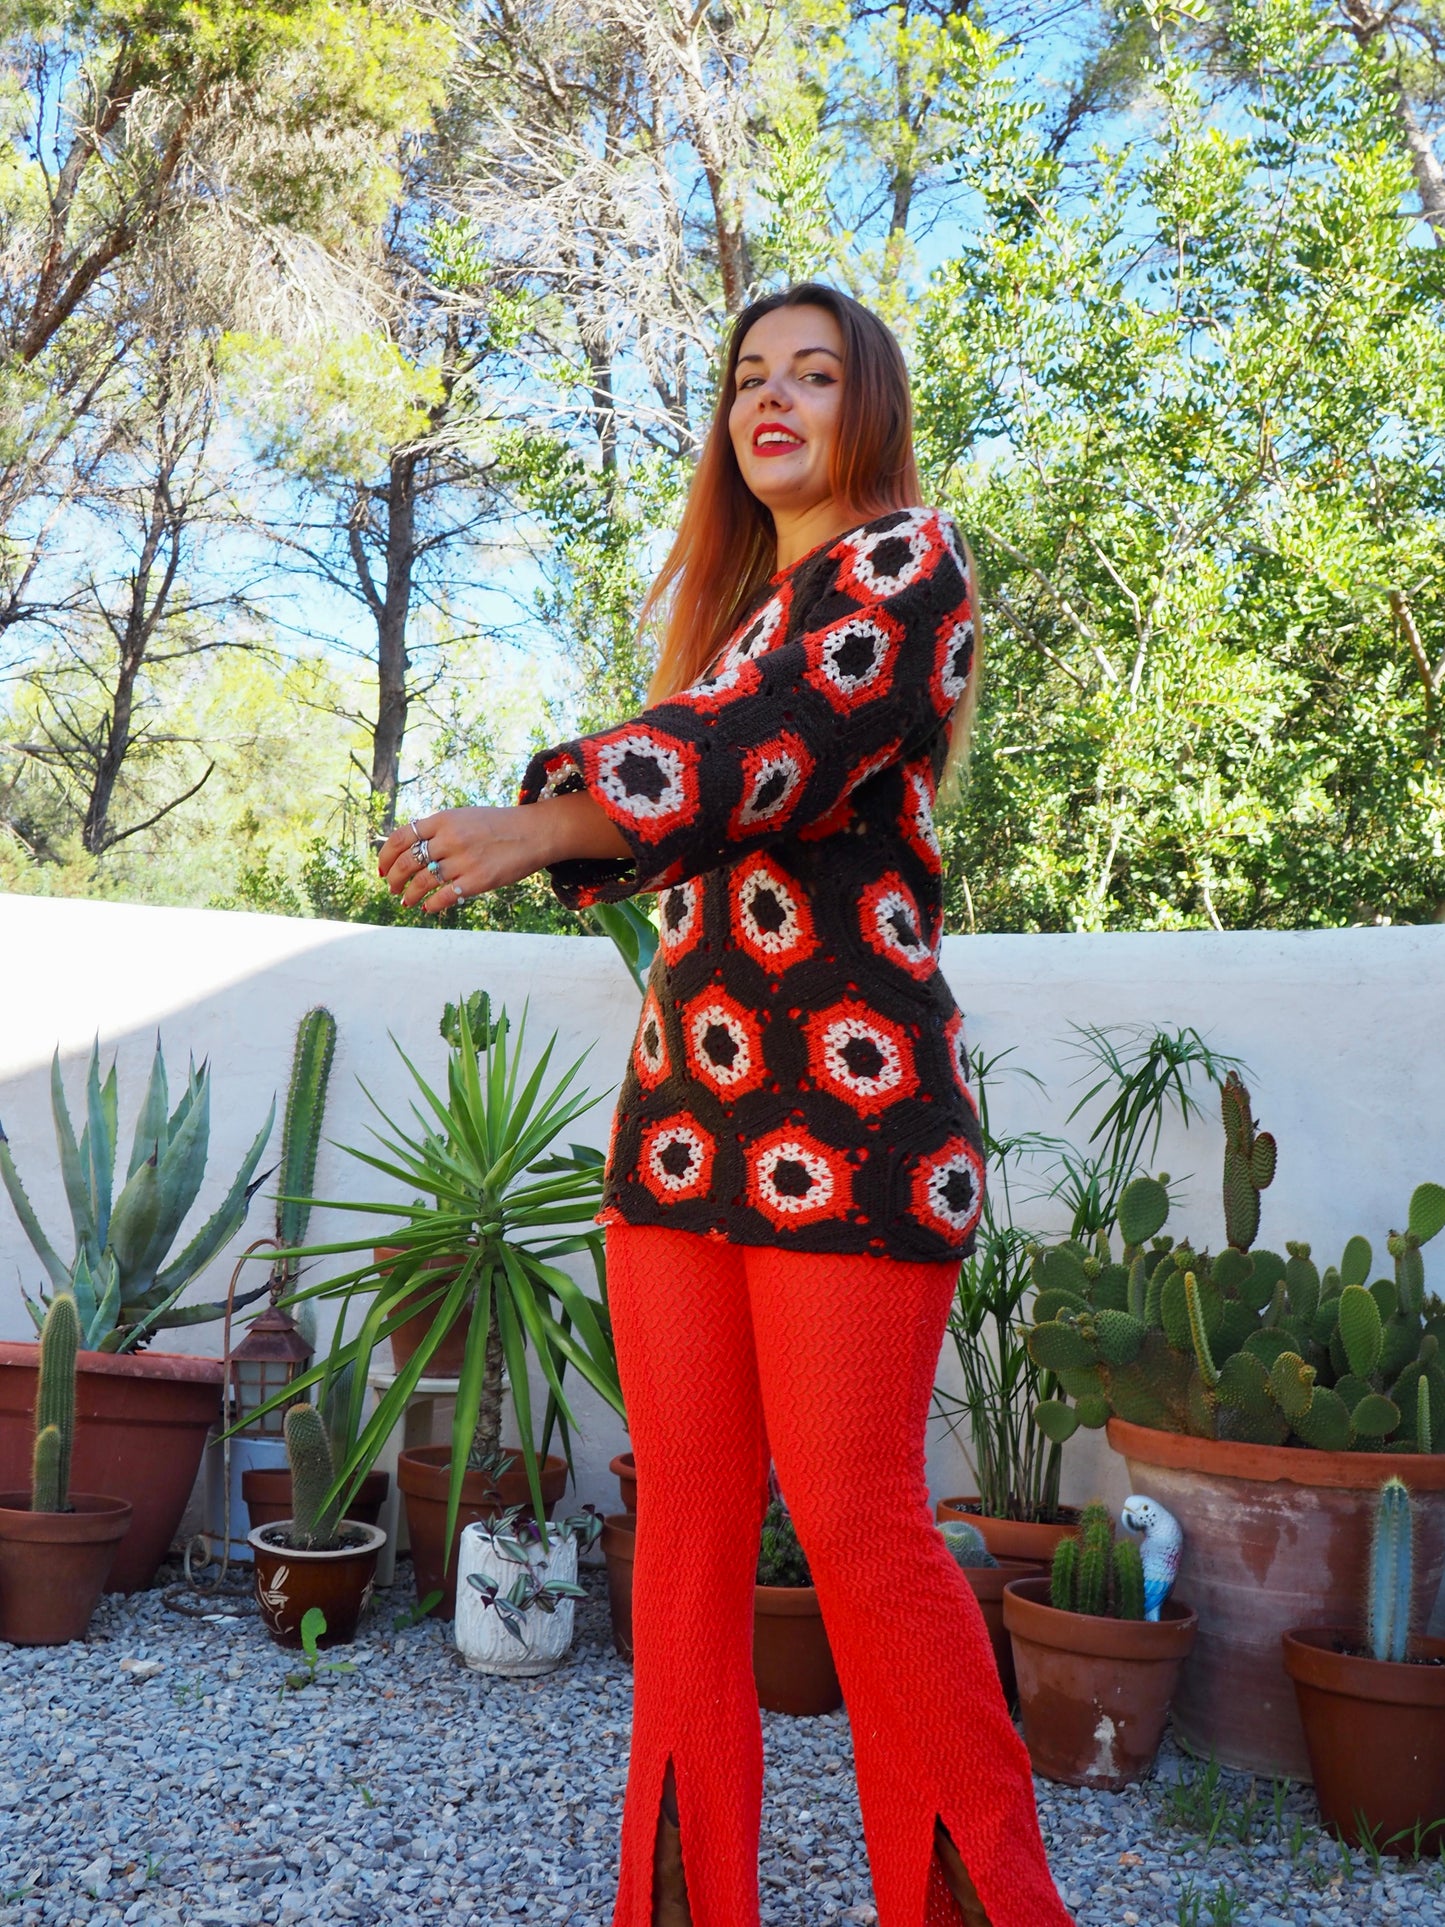 Vintage crochet orange and brown jumper dress up-cycled by Vagabond Ibiza